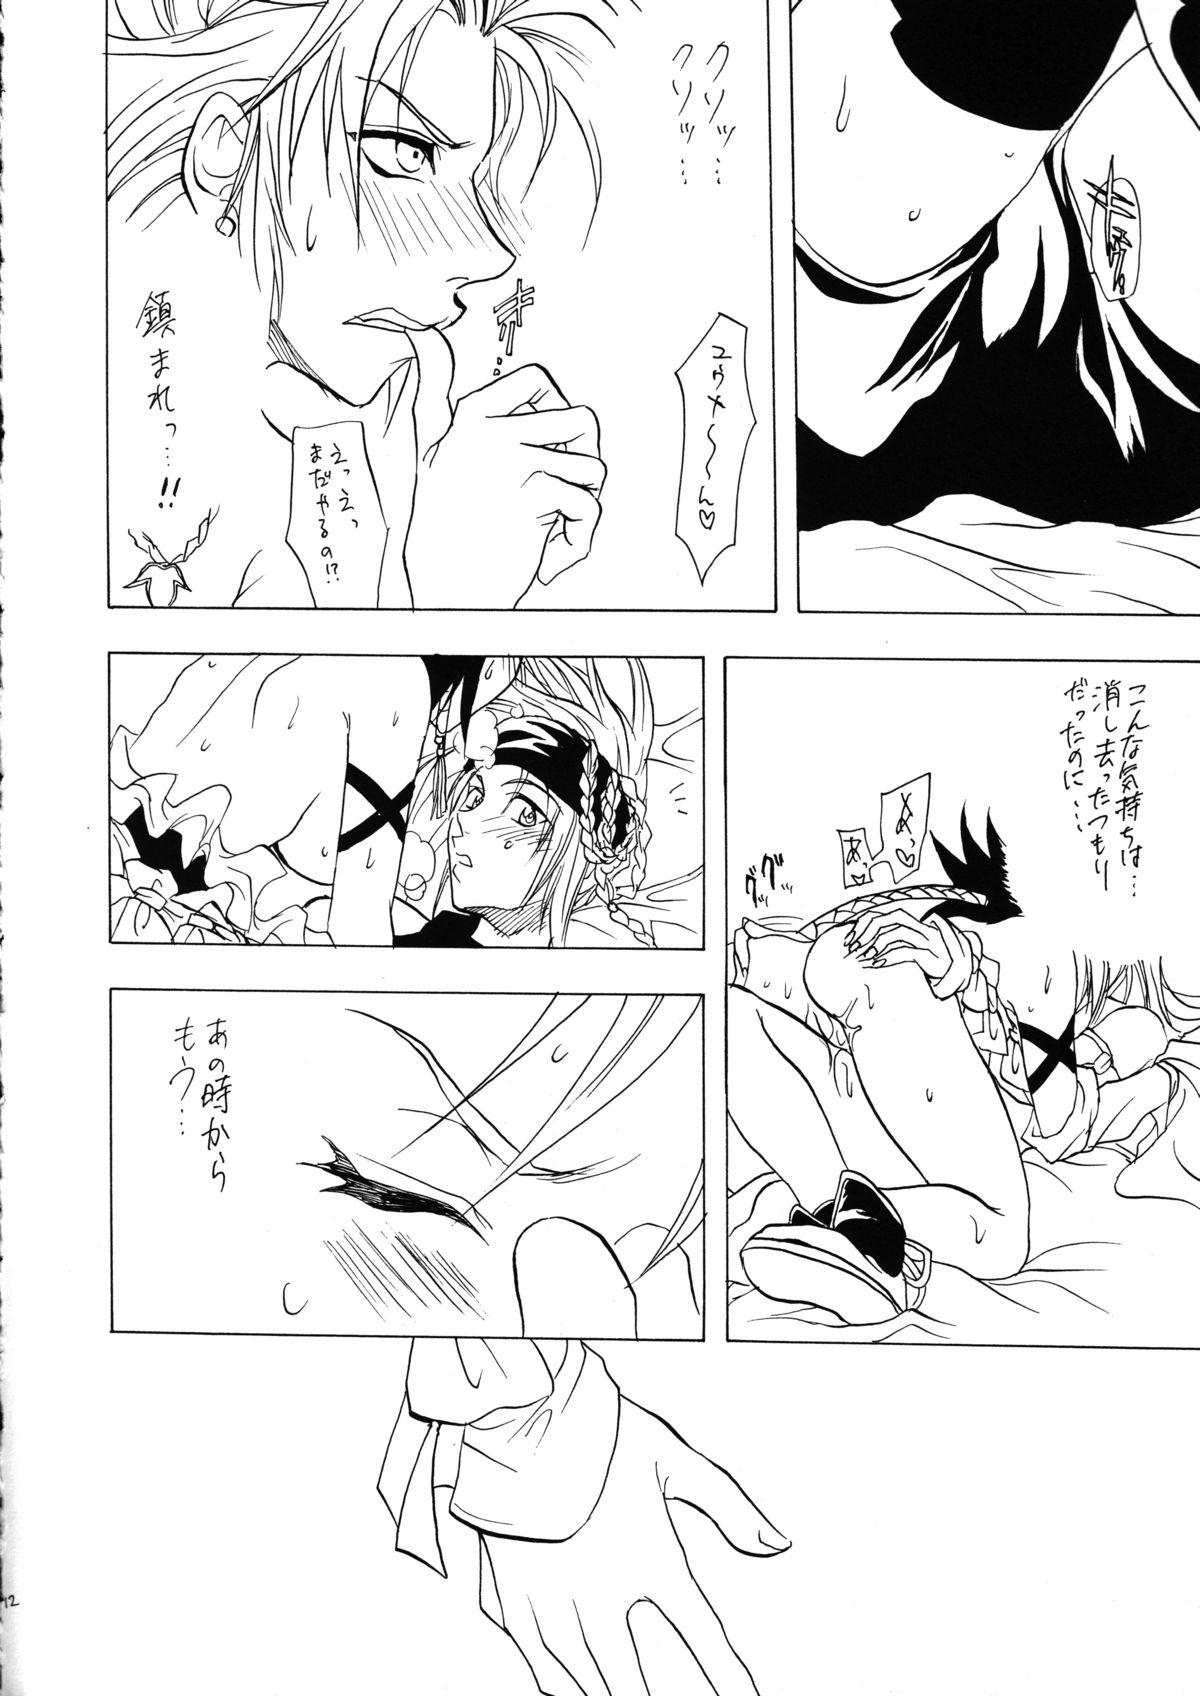 Whipping Sennen No Koi 2 - Final fantasy x-2 Hot Girl Pussy - Page 13